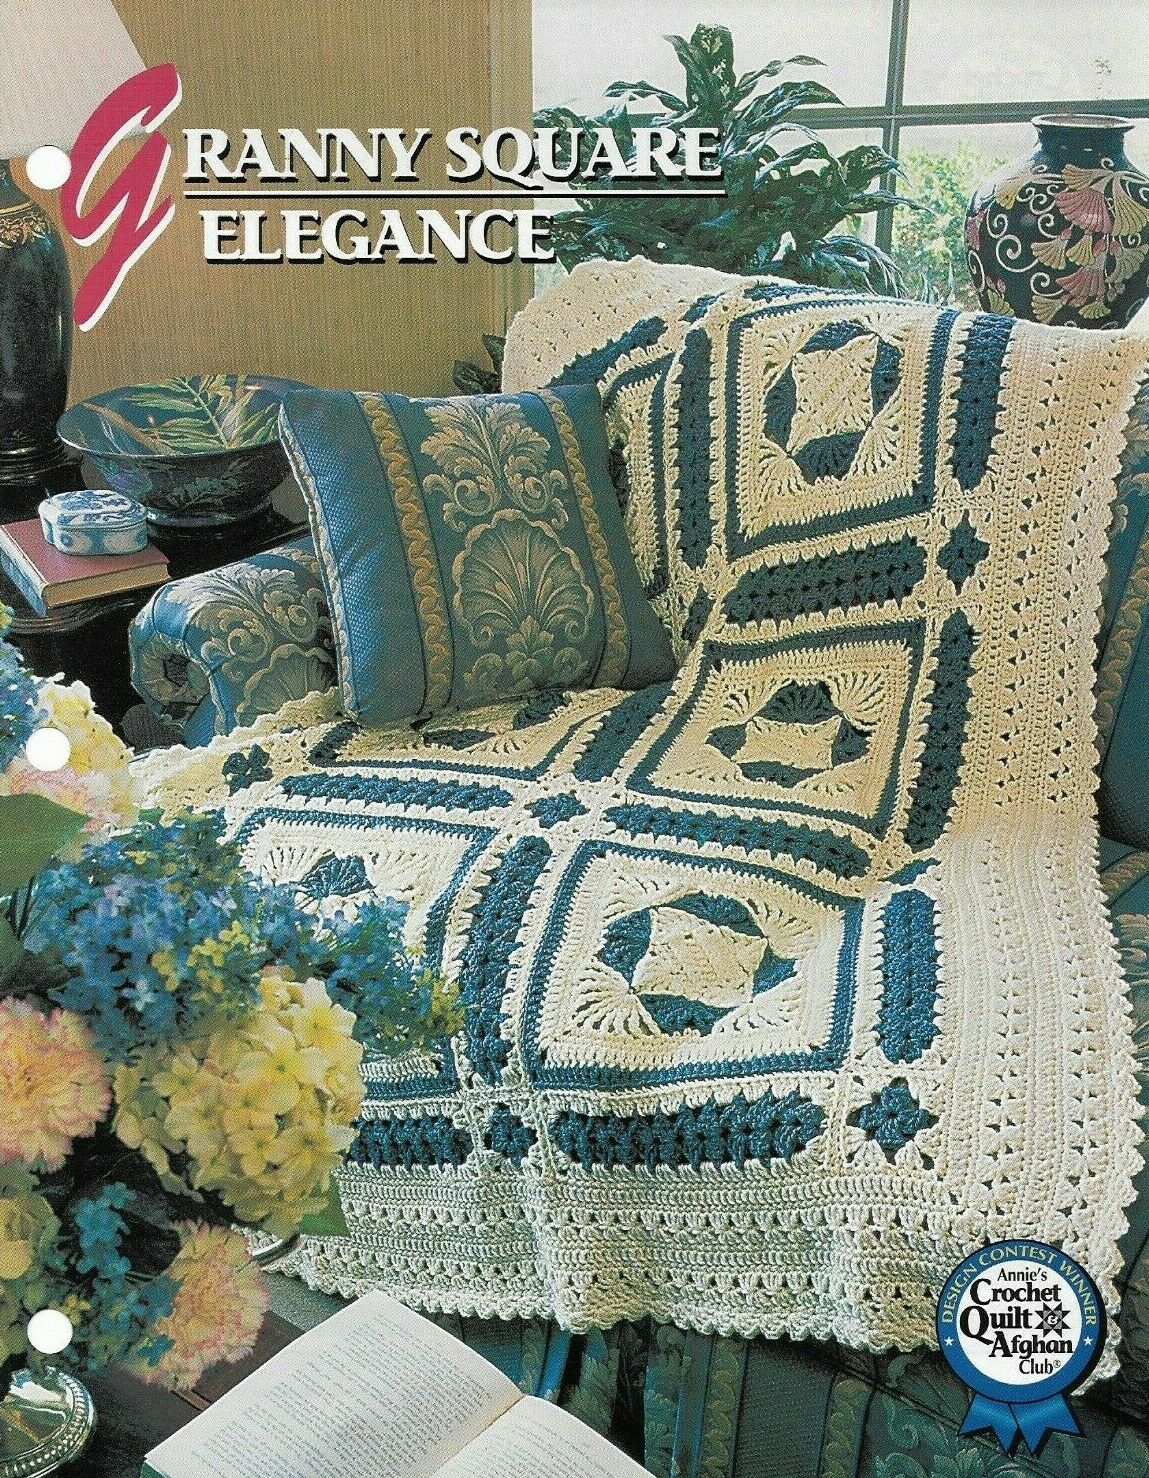 New Granny Square Elegance Annies Crochet Quilt Afghan Club Pattern Instructions